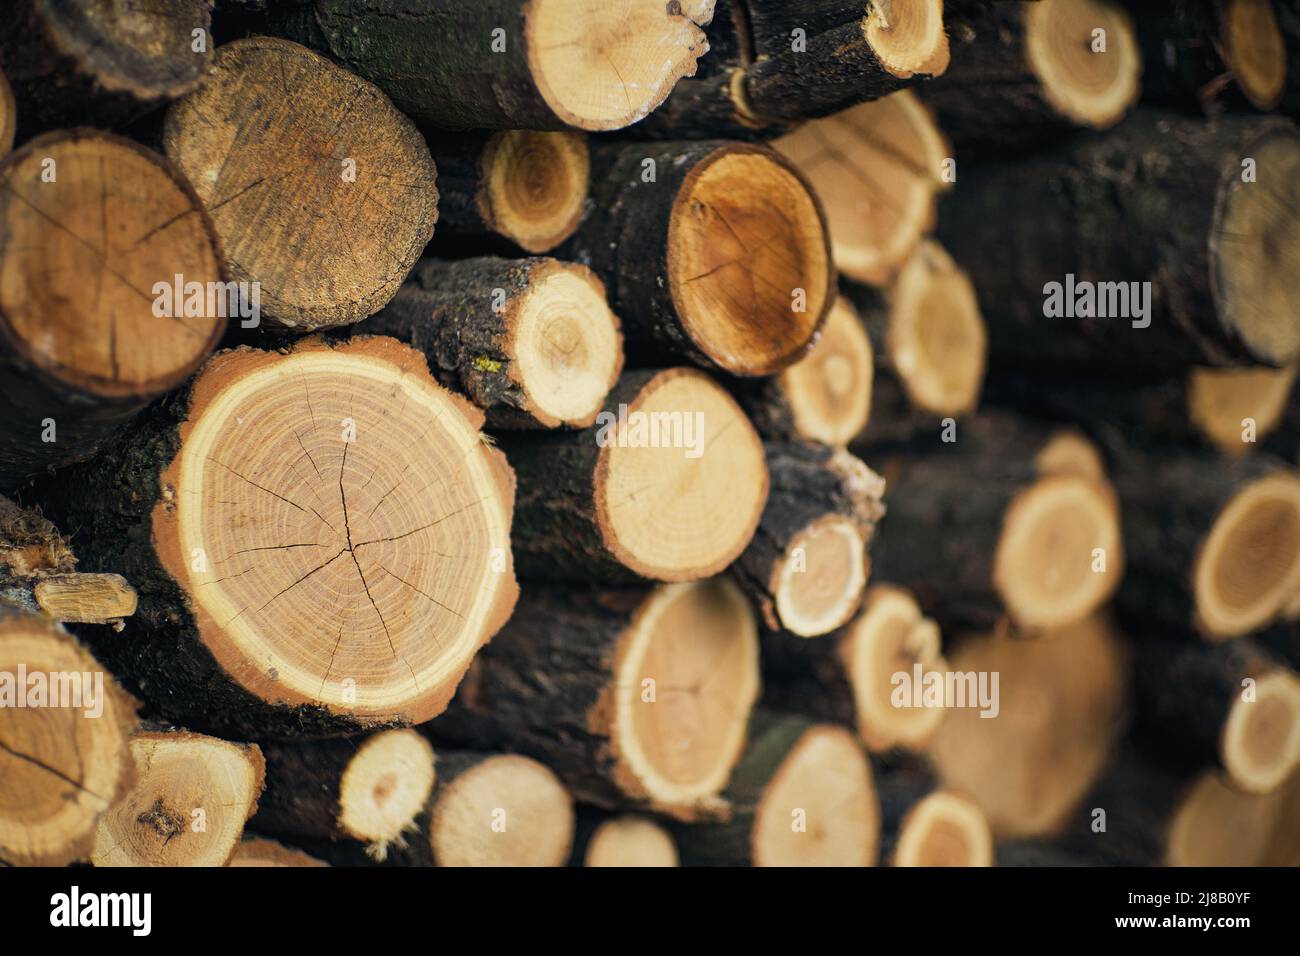 Firewood stacked outside, heating fuel concept Stock Photo